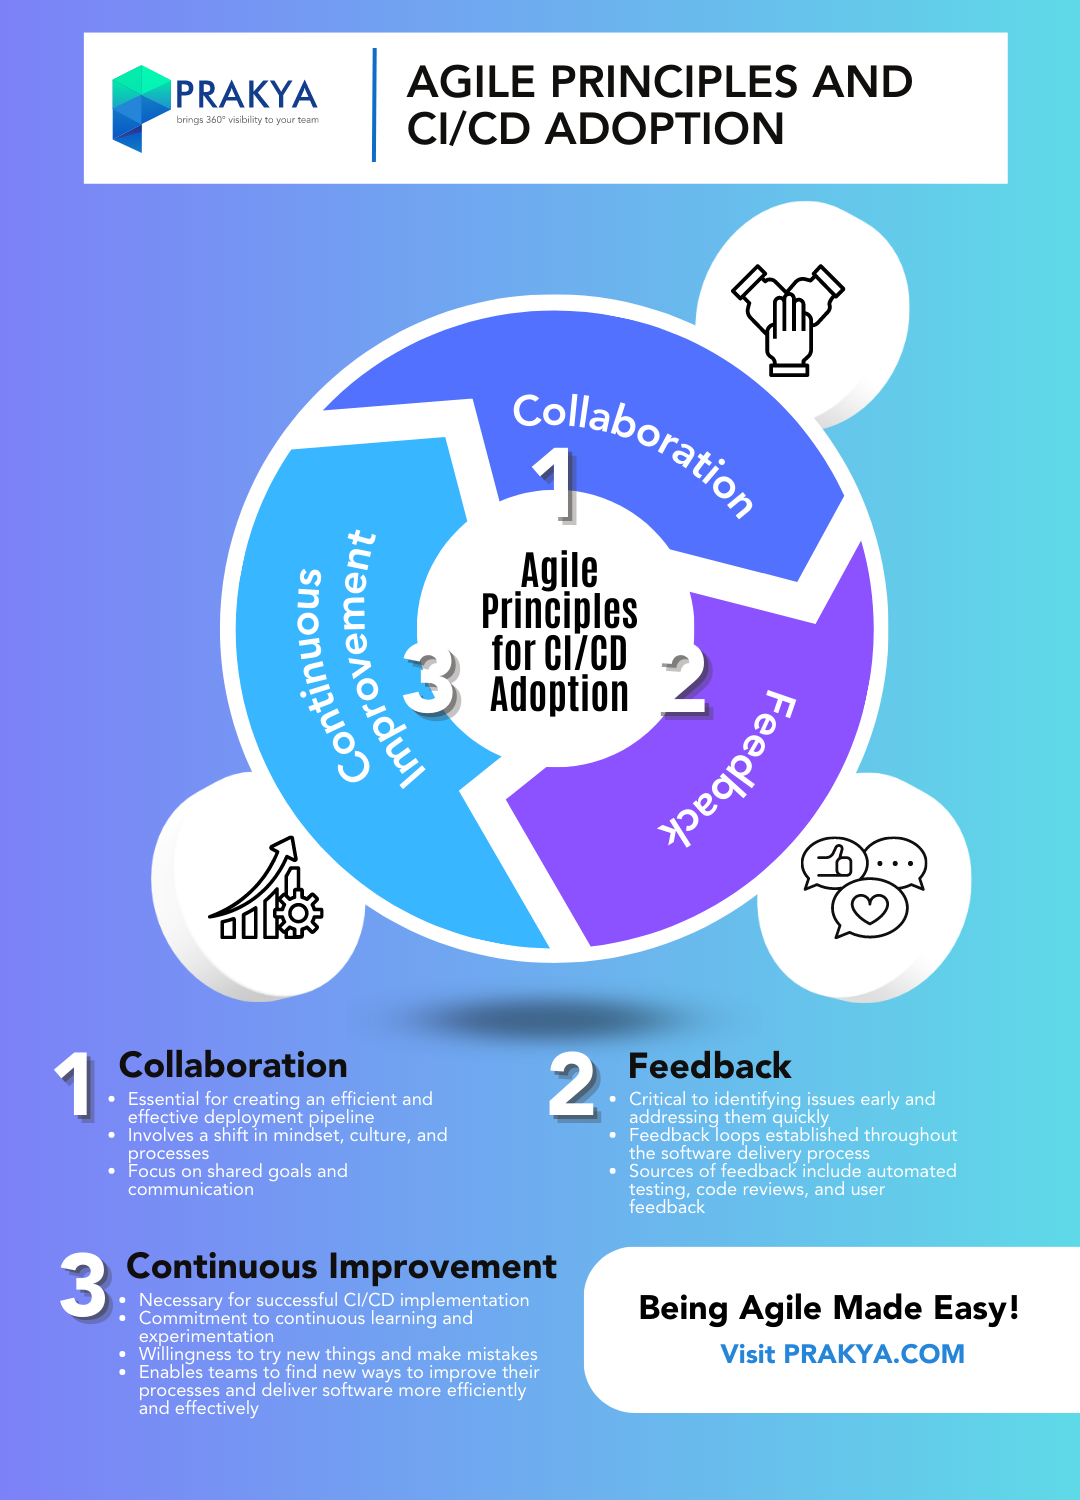  An infographic titled "Adopting CI/CD for Agile Transformation: Agile Principles and Change Readiness" highlights the importance of Agile principles and change readiness in successfully implementing CI/CD. It covers three essential Agile principles, including Collaboration, Feedback, and Continuous Improvement, and explains how they relate to CI/CD adoption. The infographic emphasizes the need for a shift in mindset, culture, and processes to create an efficient deployment pipeline and commit to continuous learning and experimentation for successful CI/CD implementation.